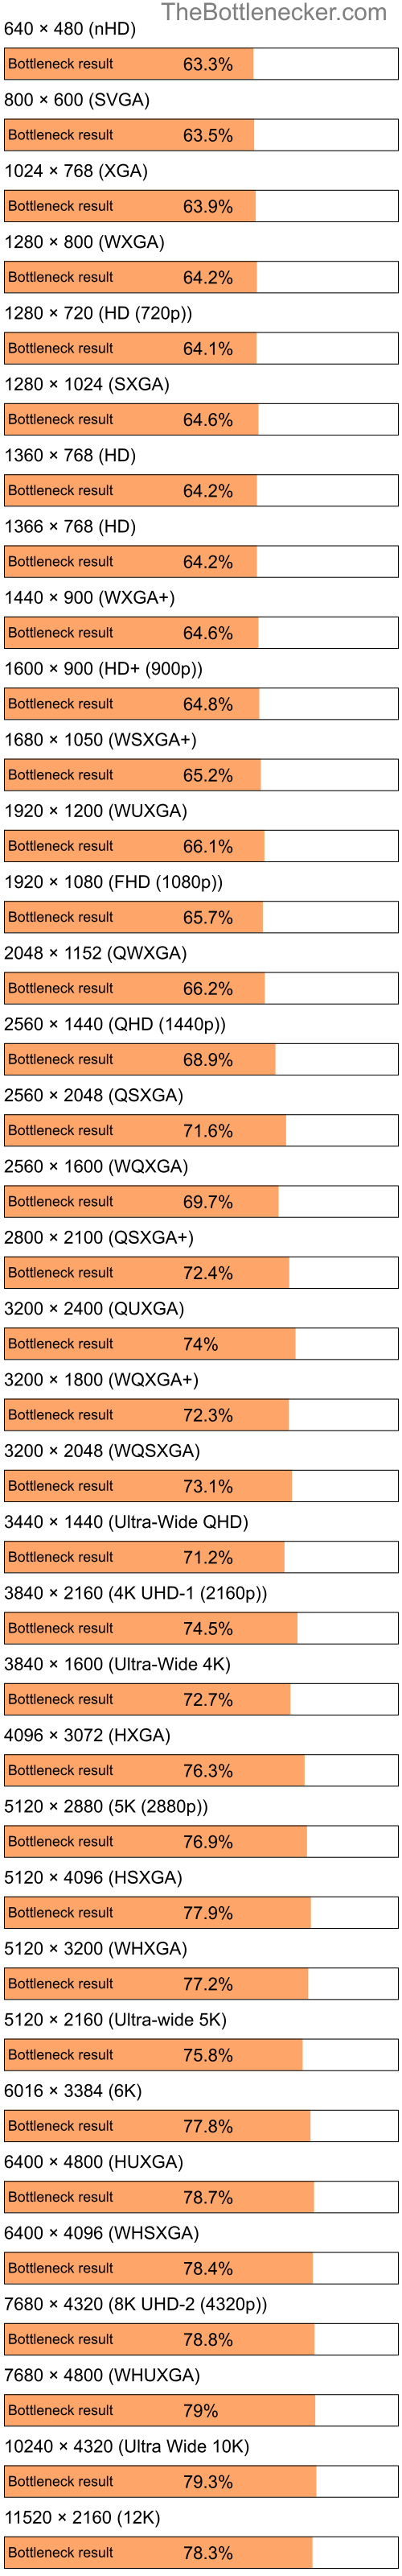 Bottleneck results by resolution for Intel Atom Z520 and AMD Mobility Radeon X1600 in General Tasks